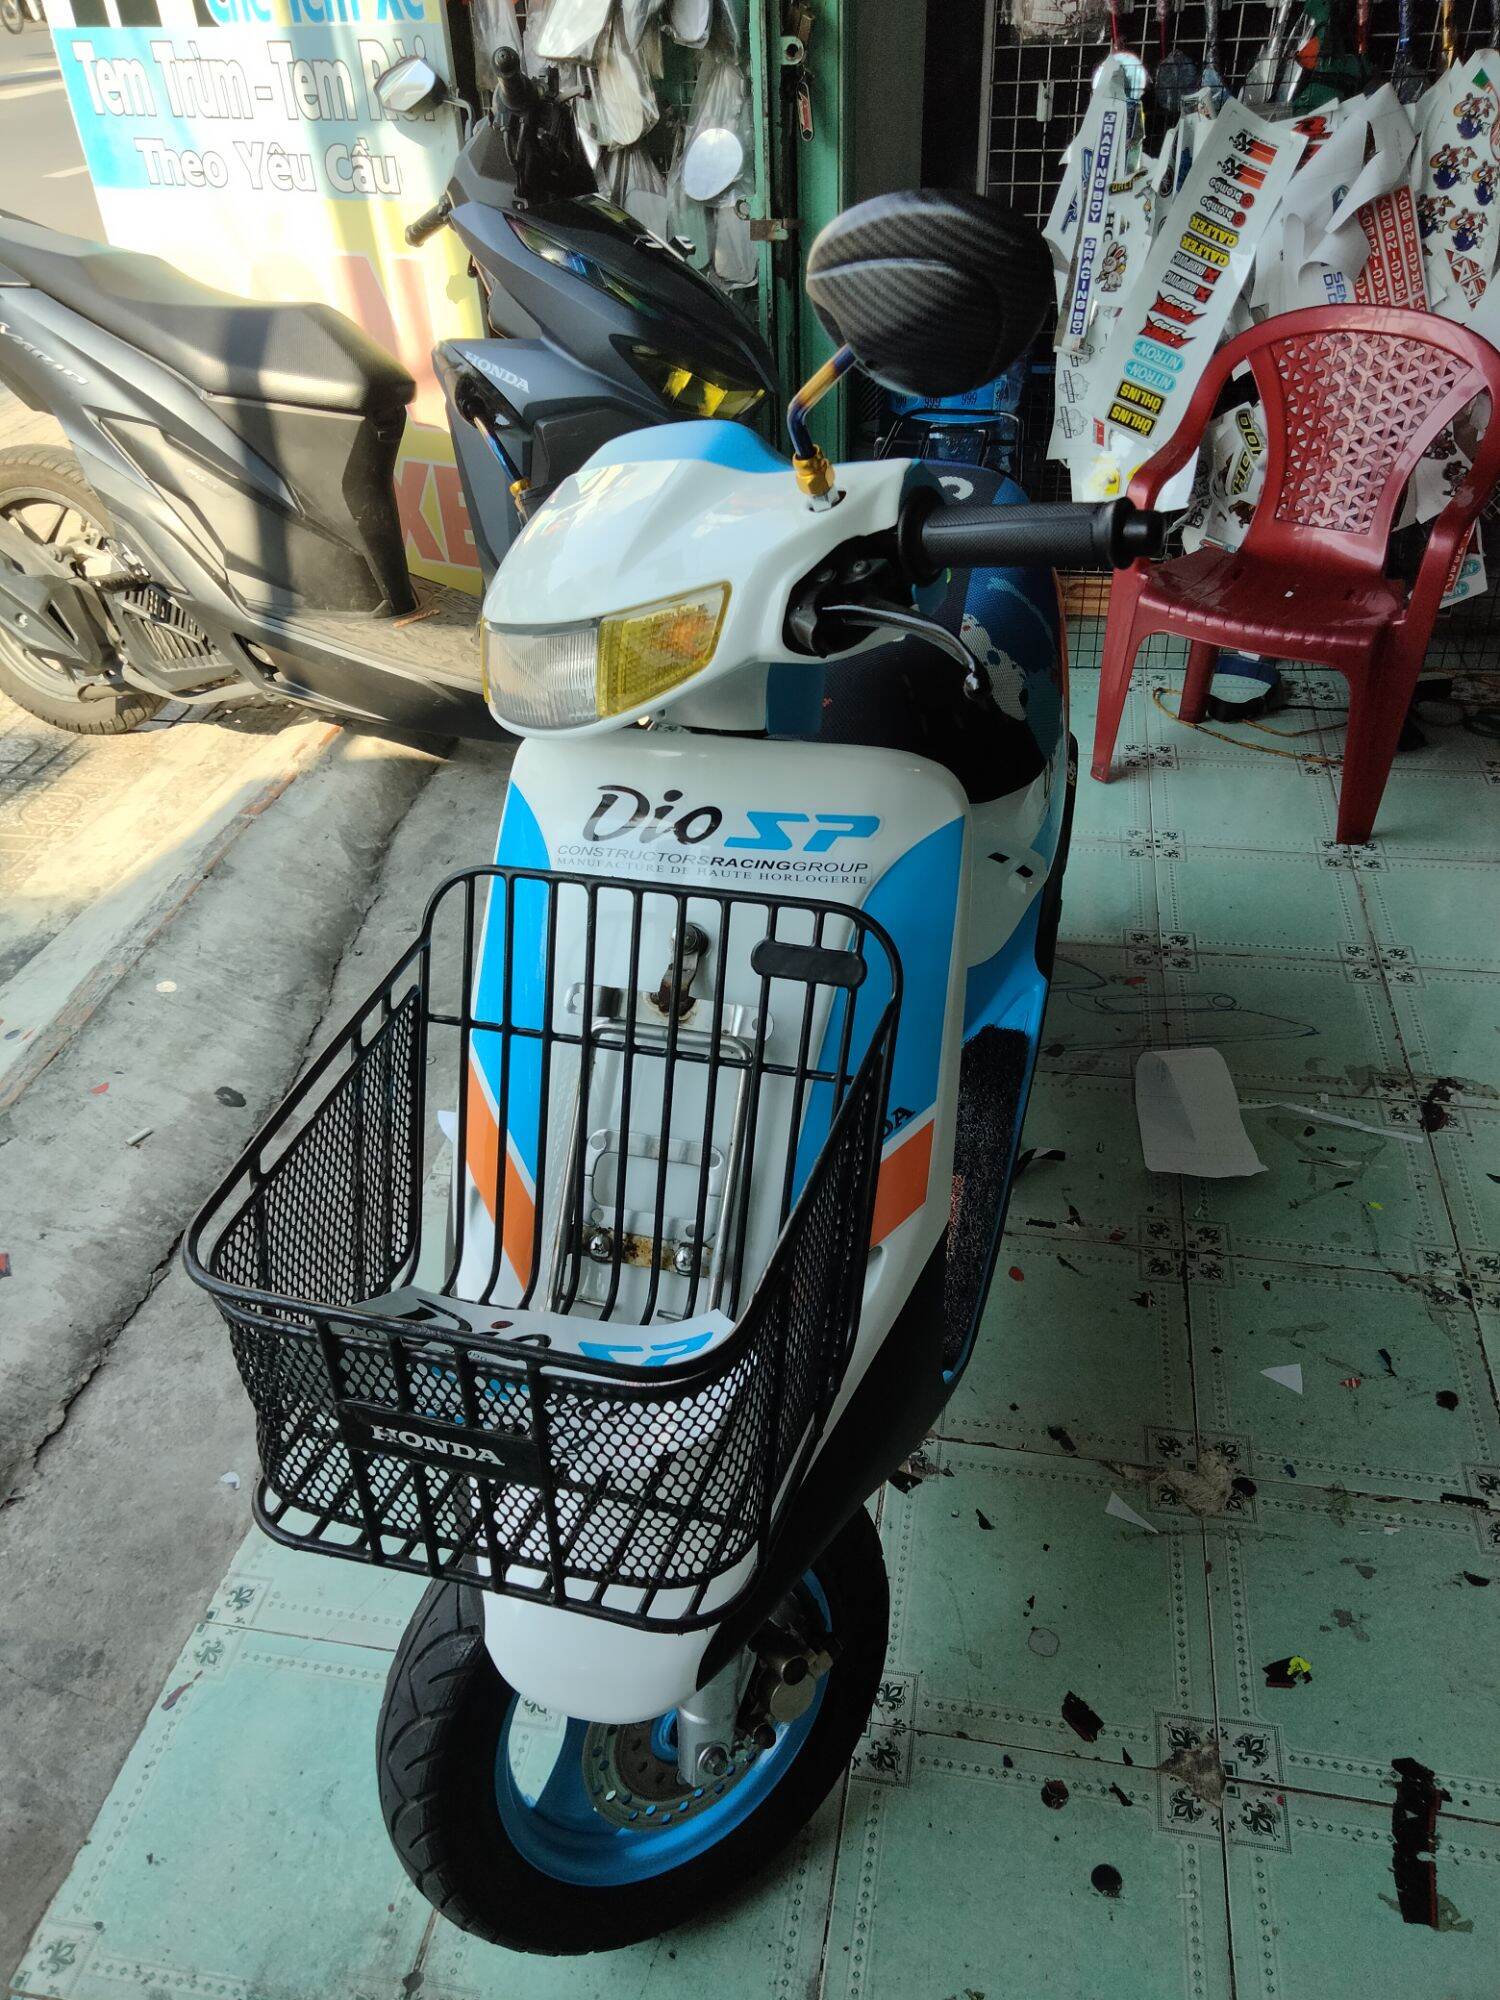 7757 HONDA DIO SP AF18 ジャンク レストアベース スクーター product details  Proxy bidding  and ordering service for auctions and shopping within Japan and the United  States  Get the latest news on